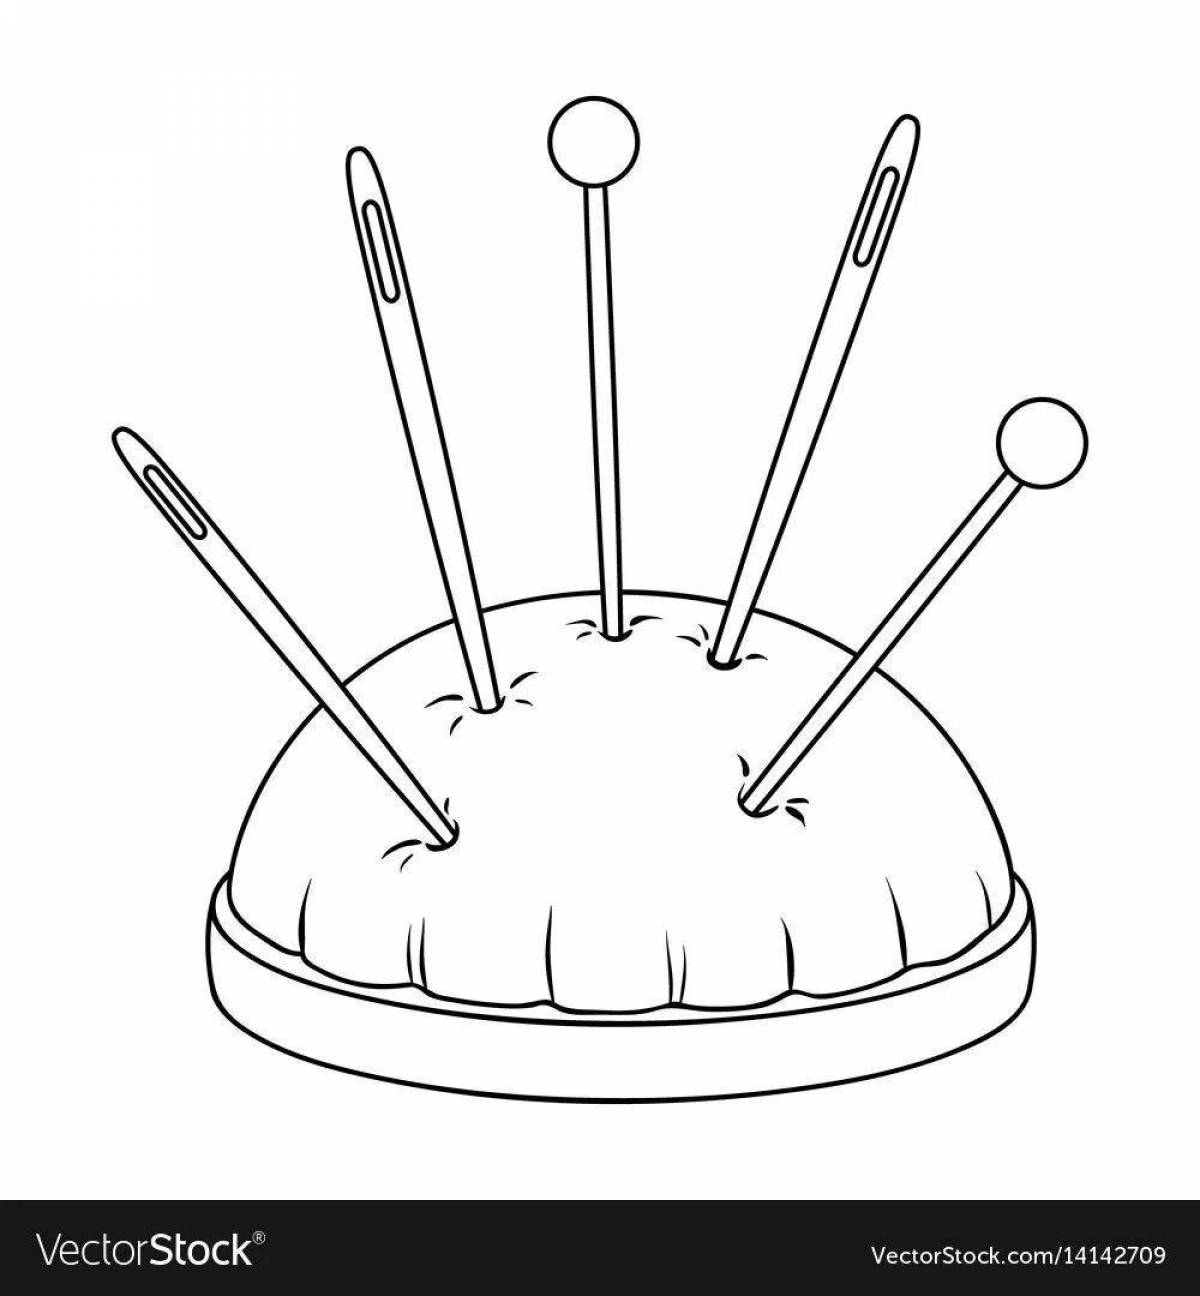 Colorful juvenile needle coloring page